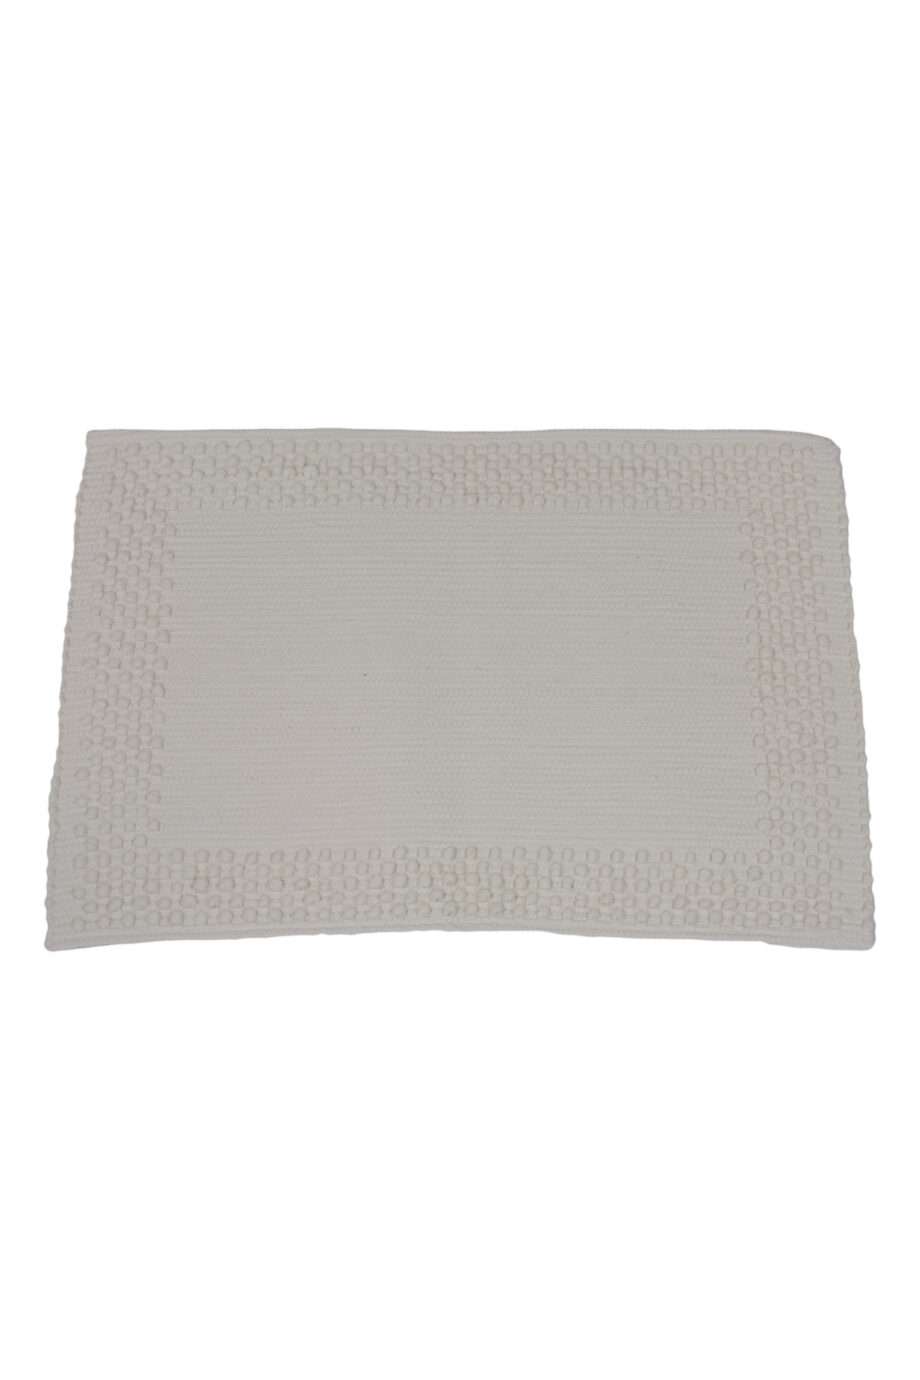 frame off-white woven cotton placemat small